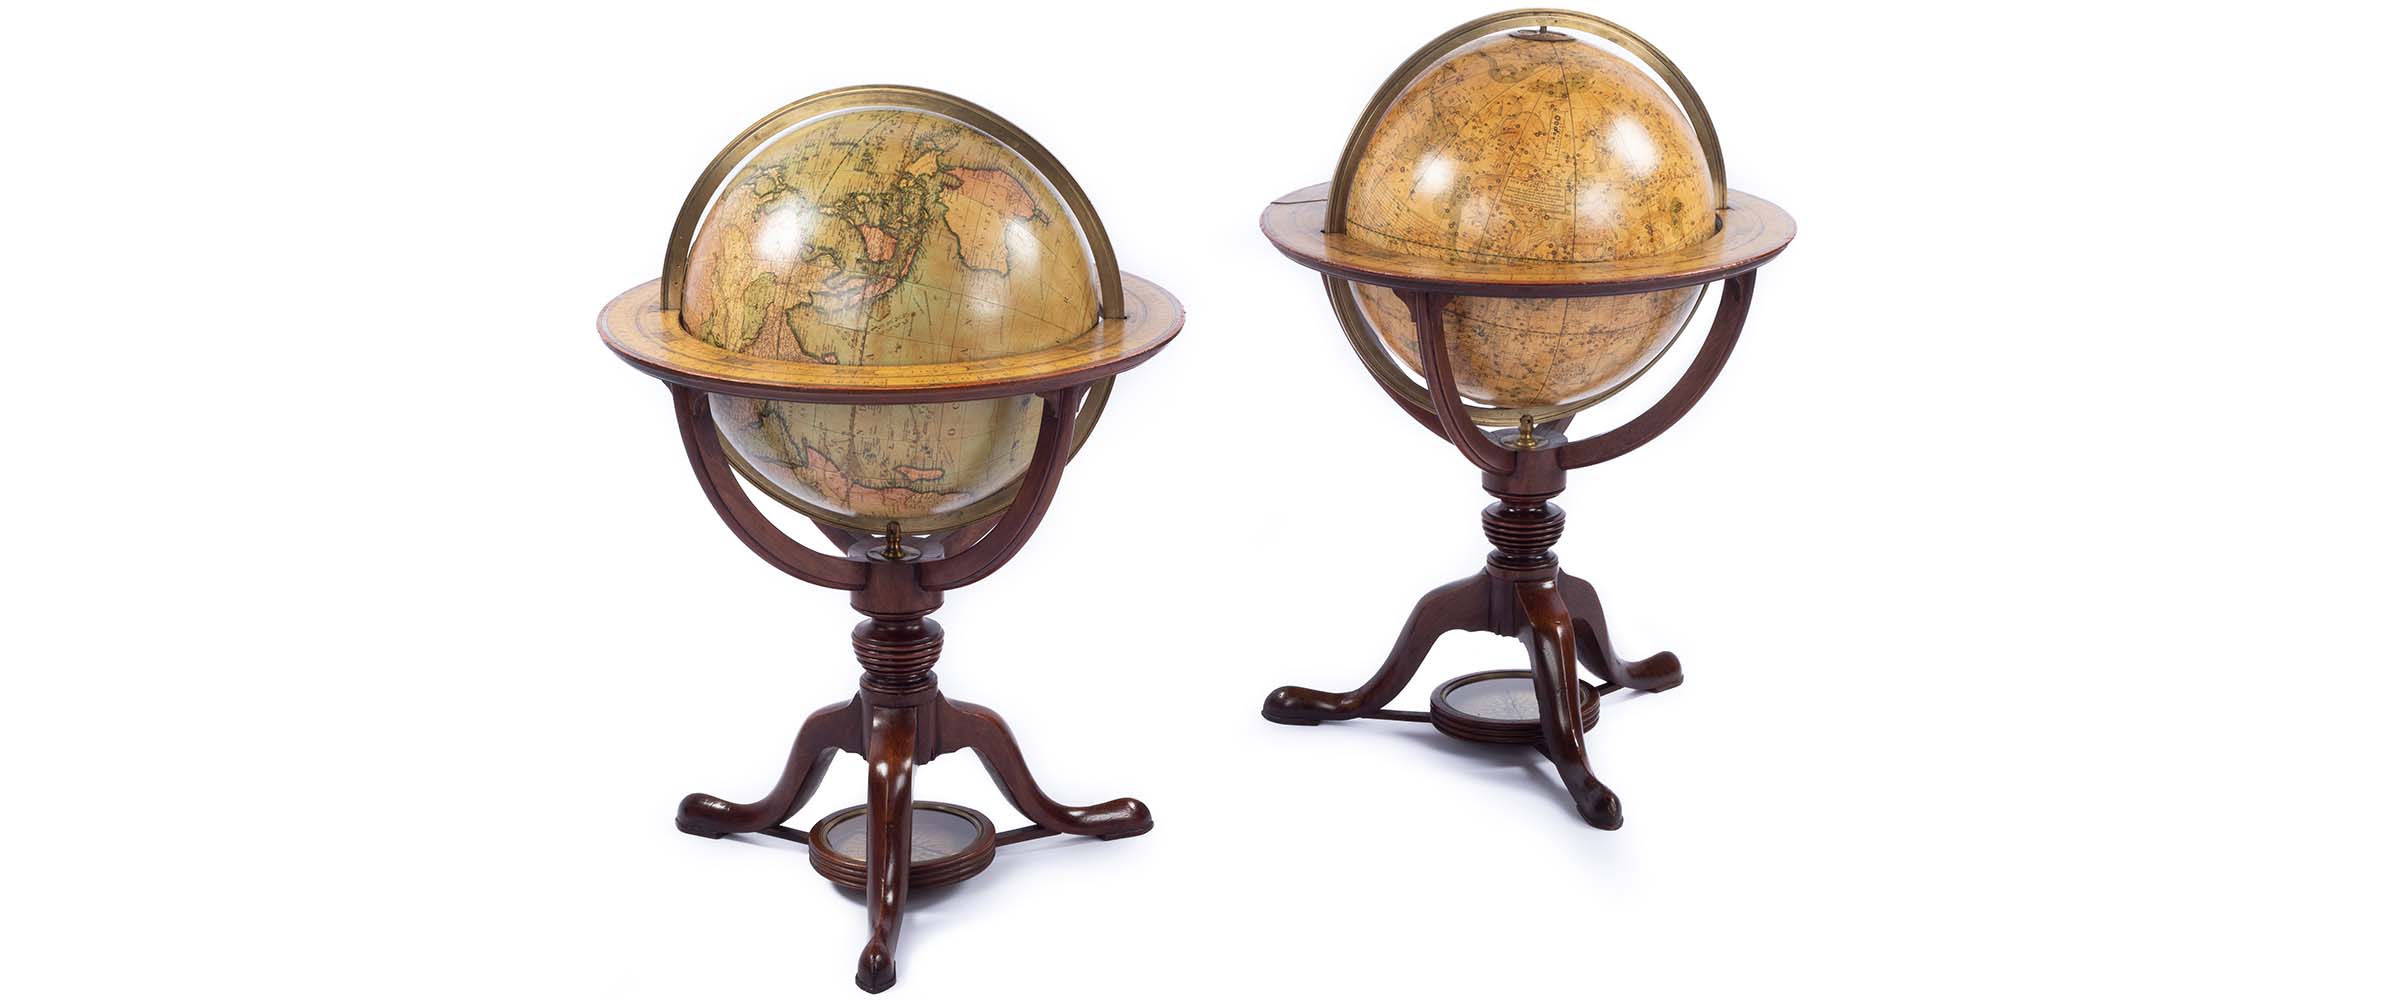 Pair of Globes: Cary's New Terrestrial Globe, delineated from the